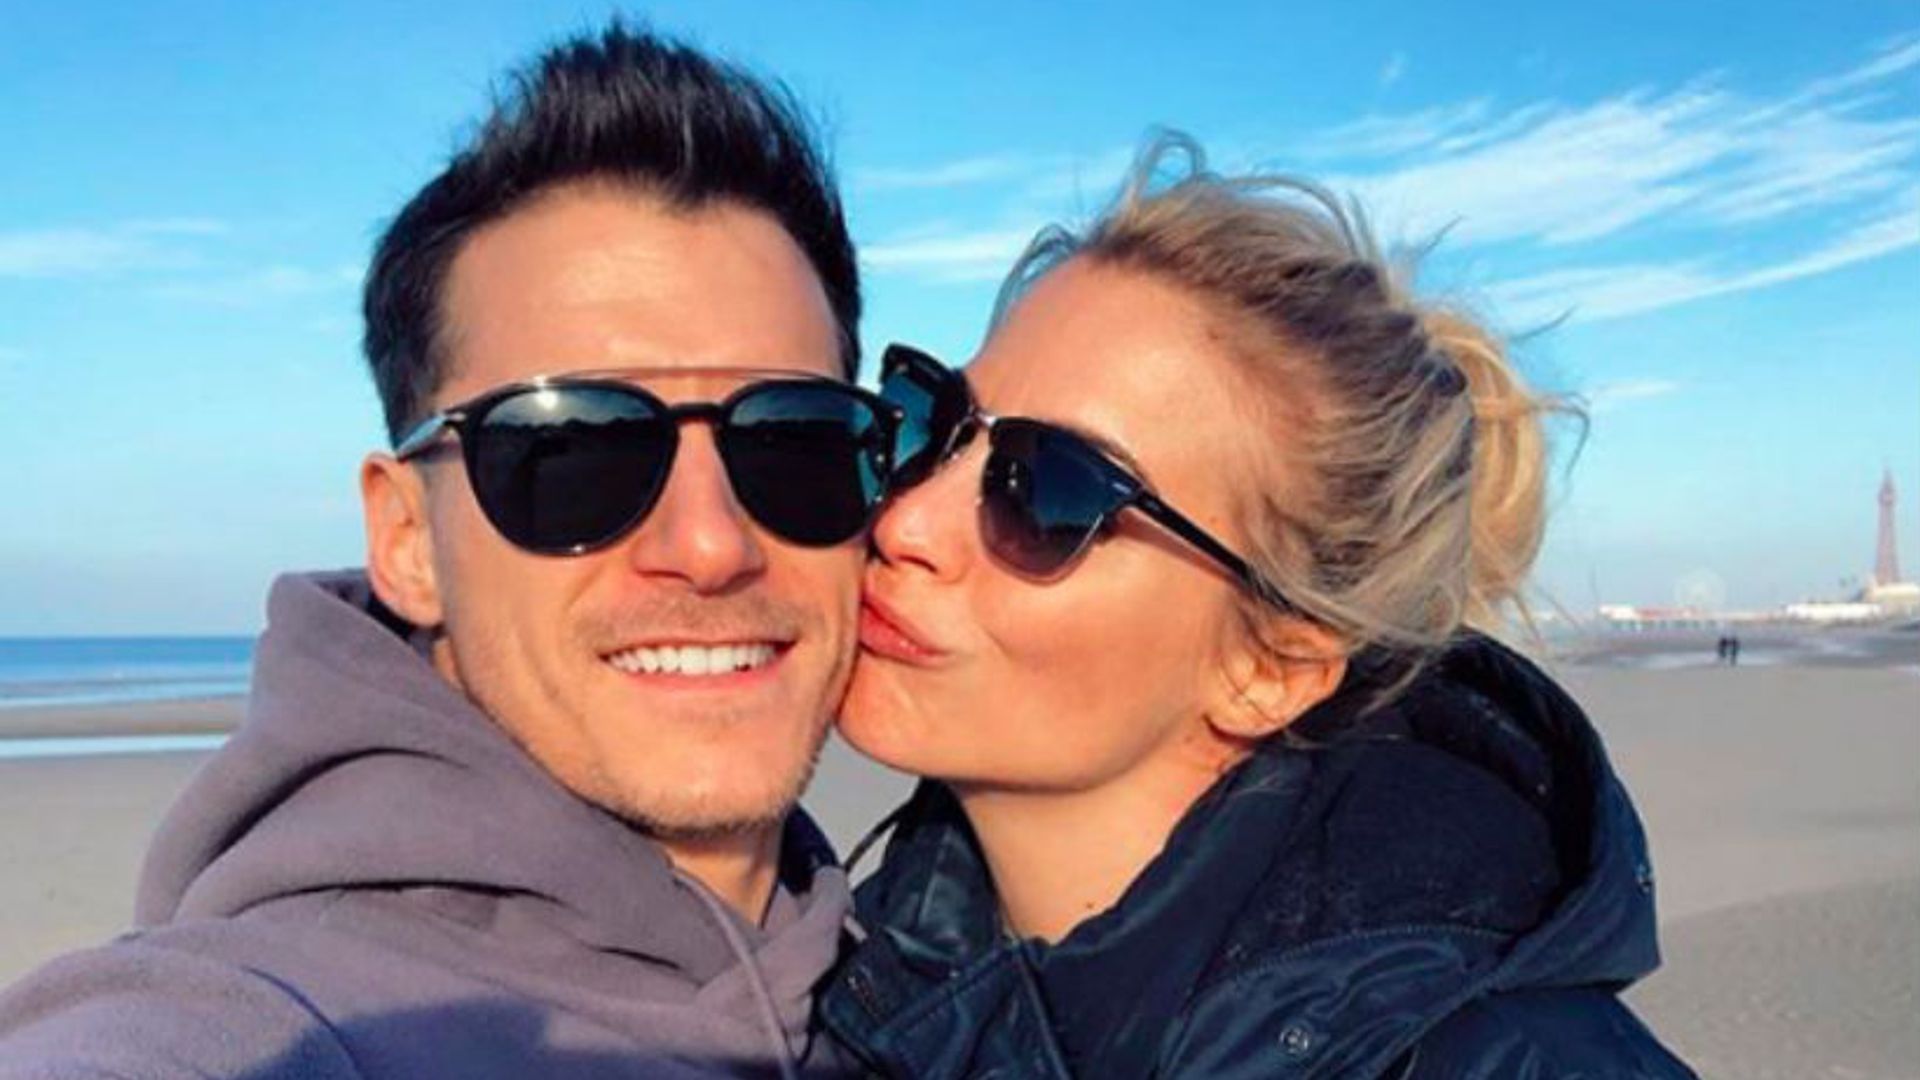 Fans think Strictly's Gorka Marquez and Gemma Atkinson will get married after latest post